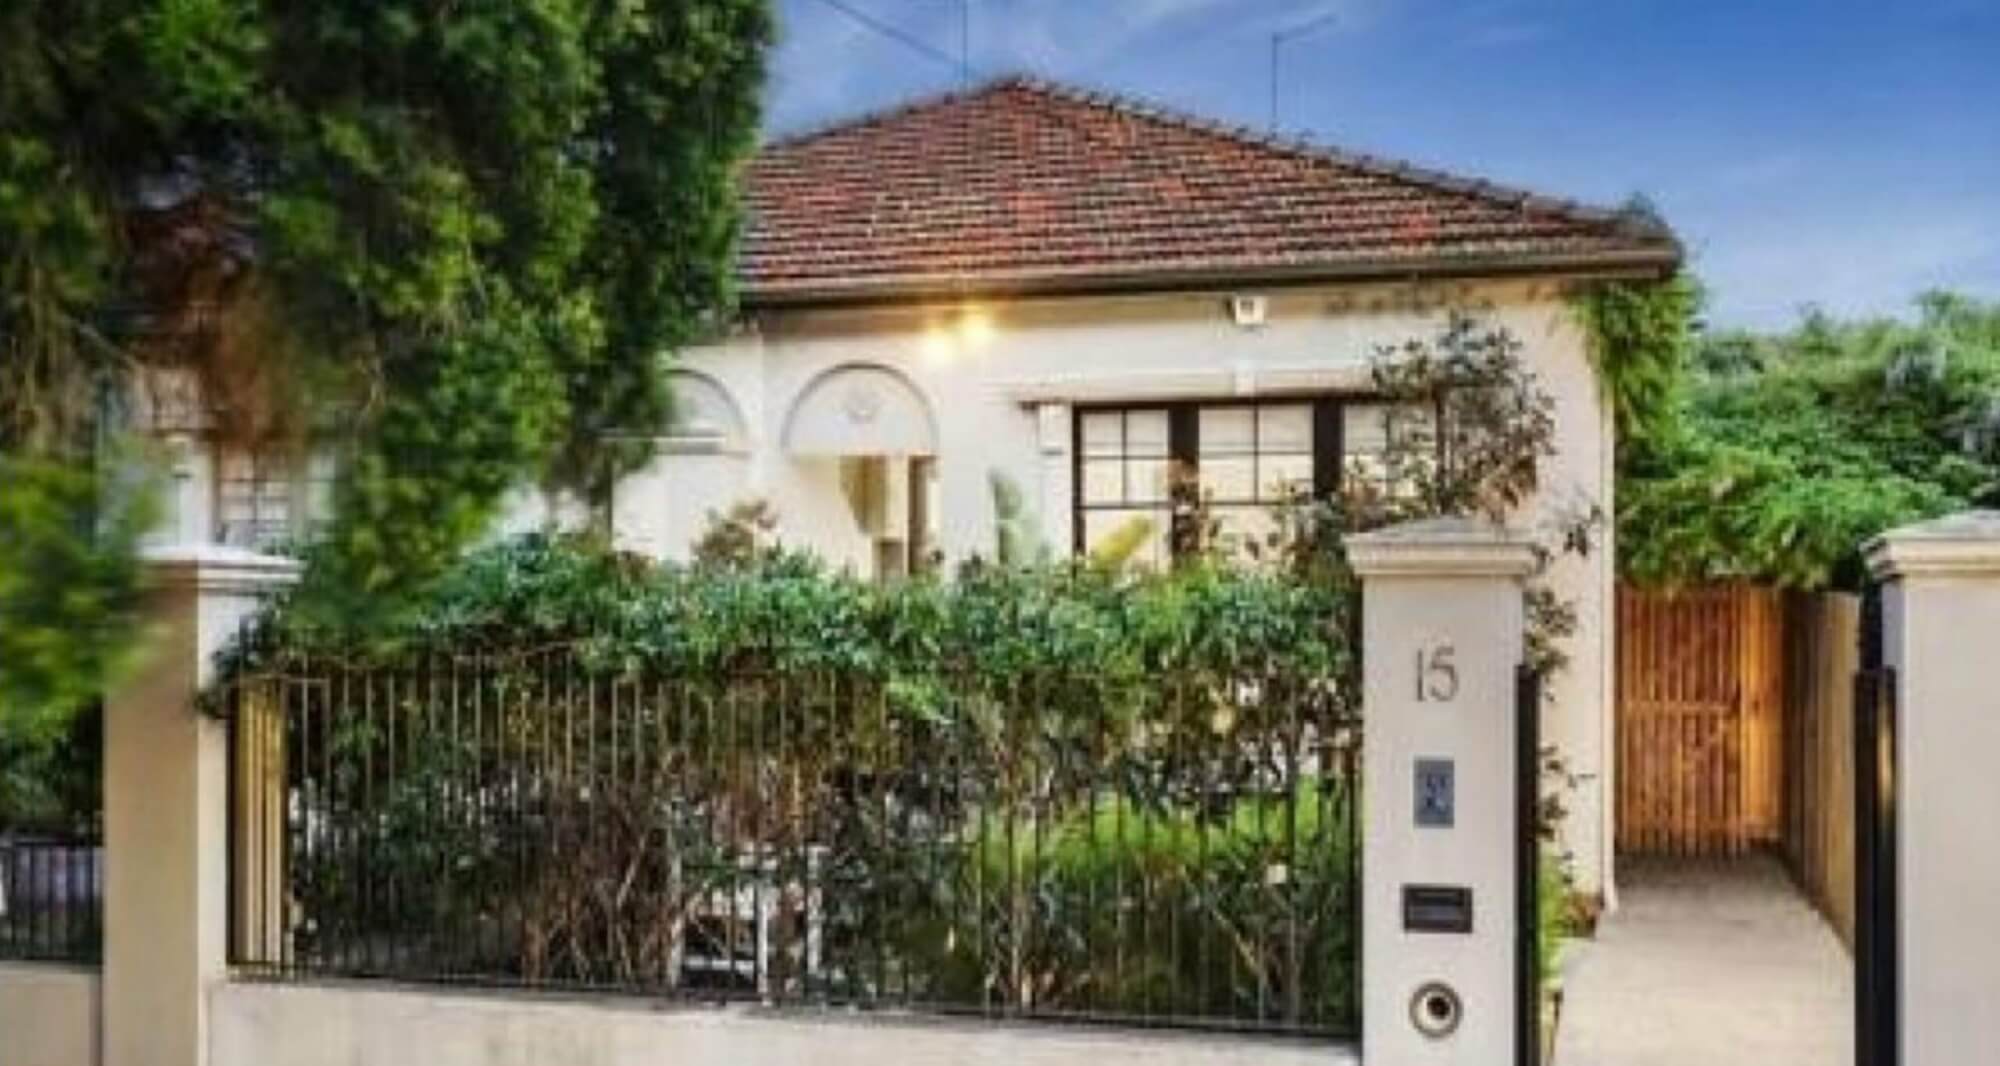 Rare, unrenovated Elwood home fetches just over $1 million under the hammer